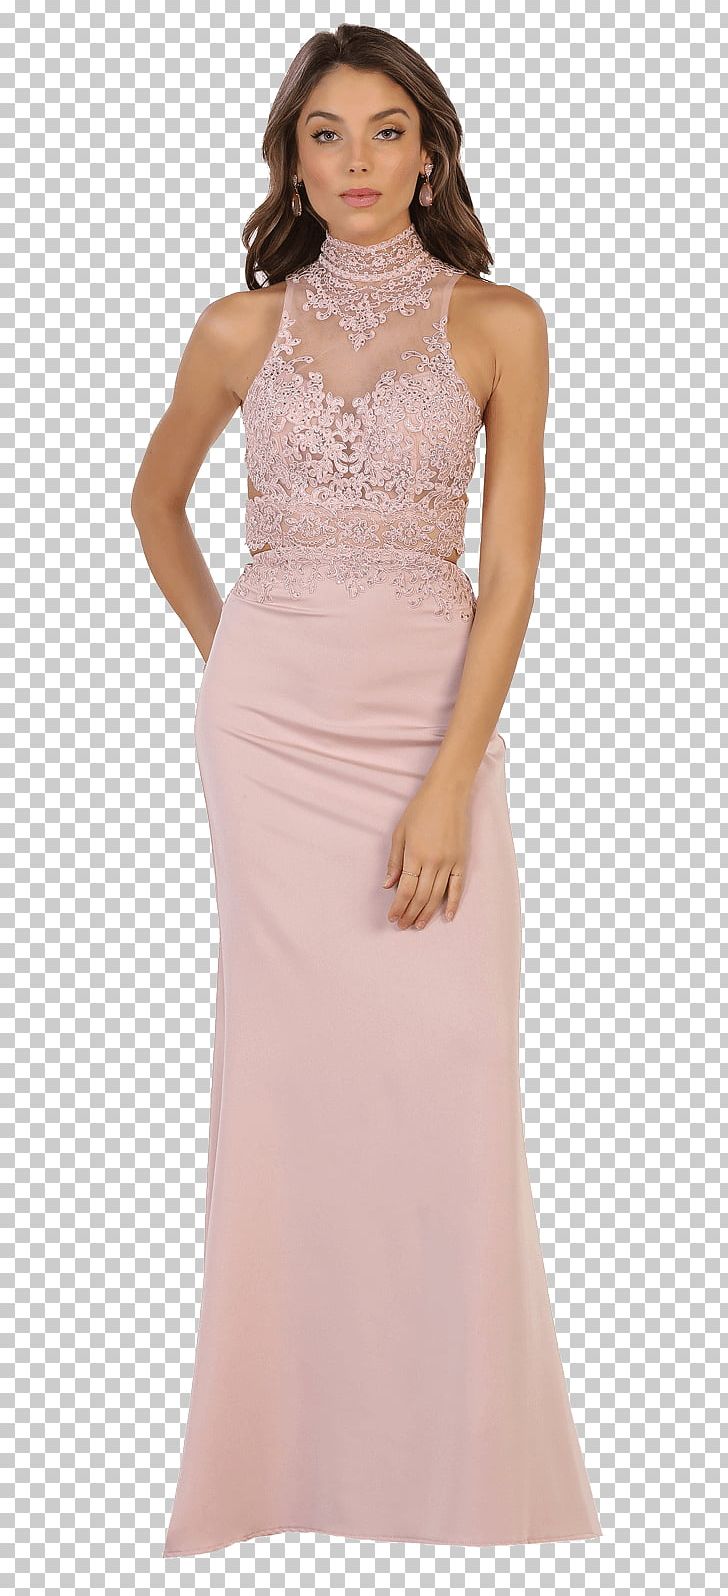 Wedding Dress Prom Gown Cocktail Dress PNG, Clipart, Aline, Bridal Clothing, Bridal Party Dress, Bridesmaid, Clothing Free PNG Download